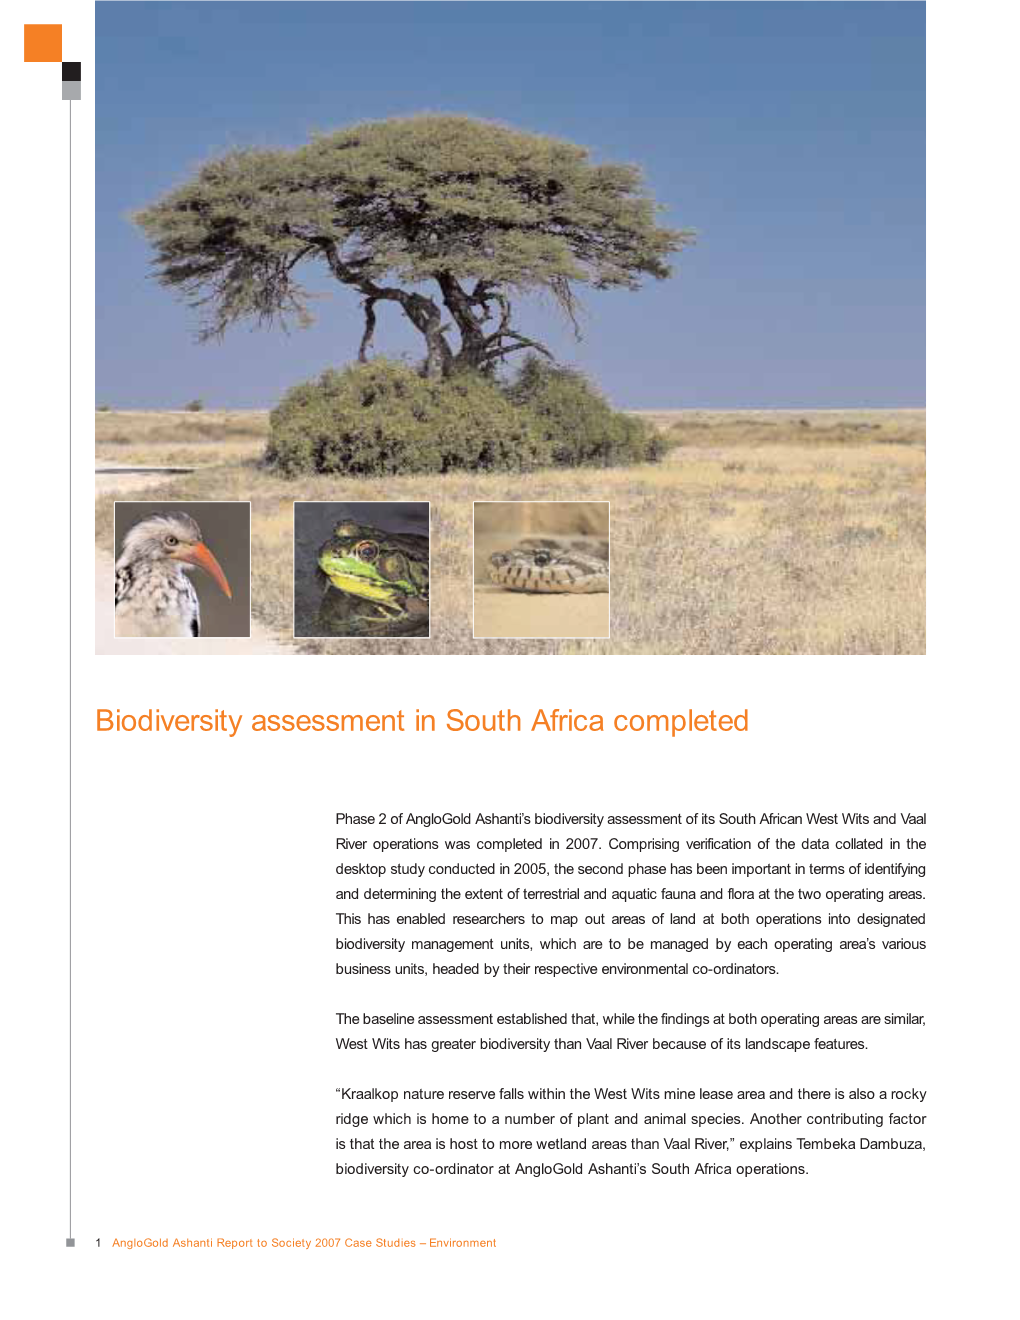 Biodiversity Assessment in South Africa Completed